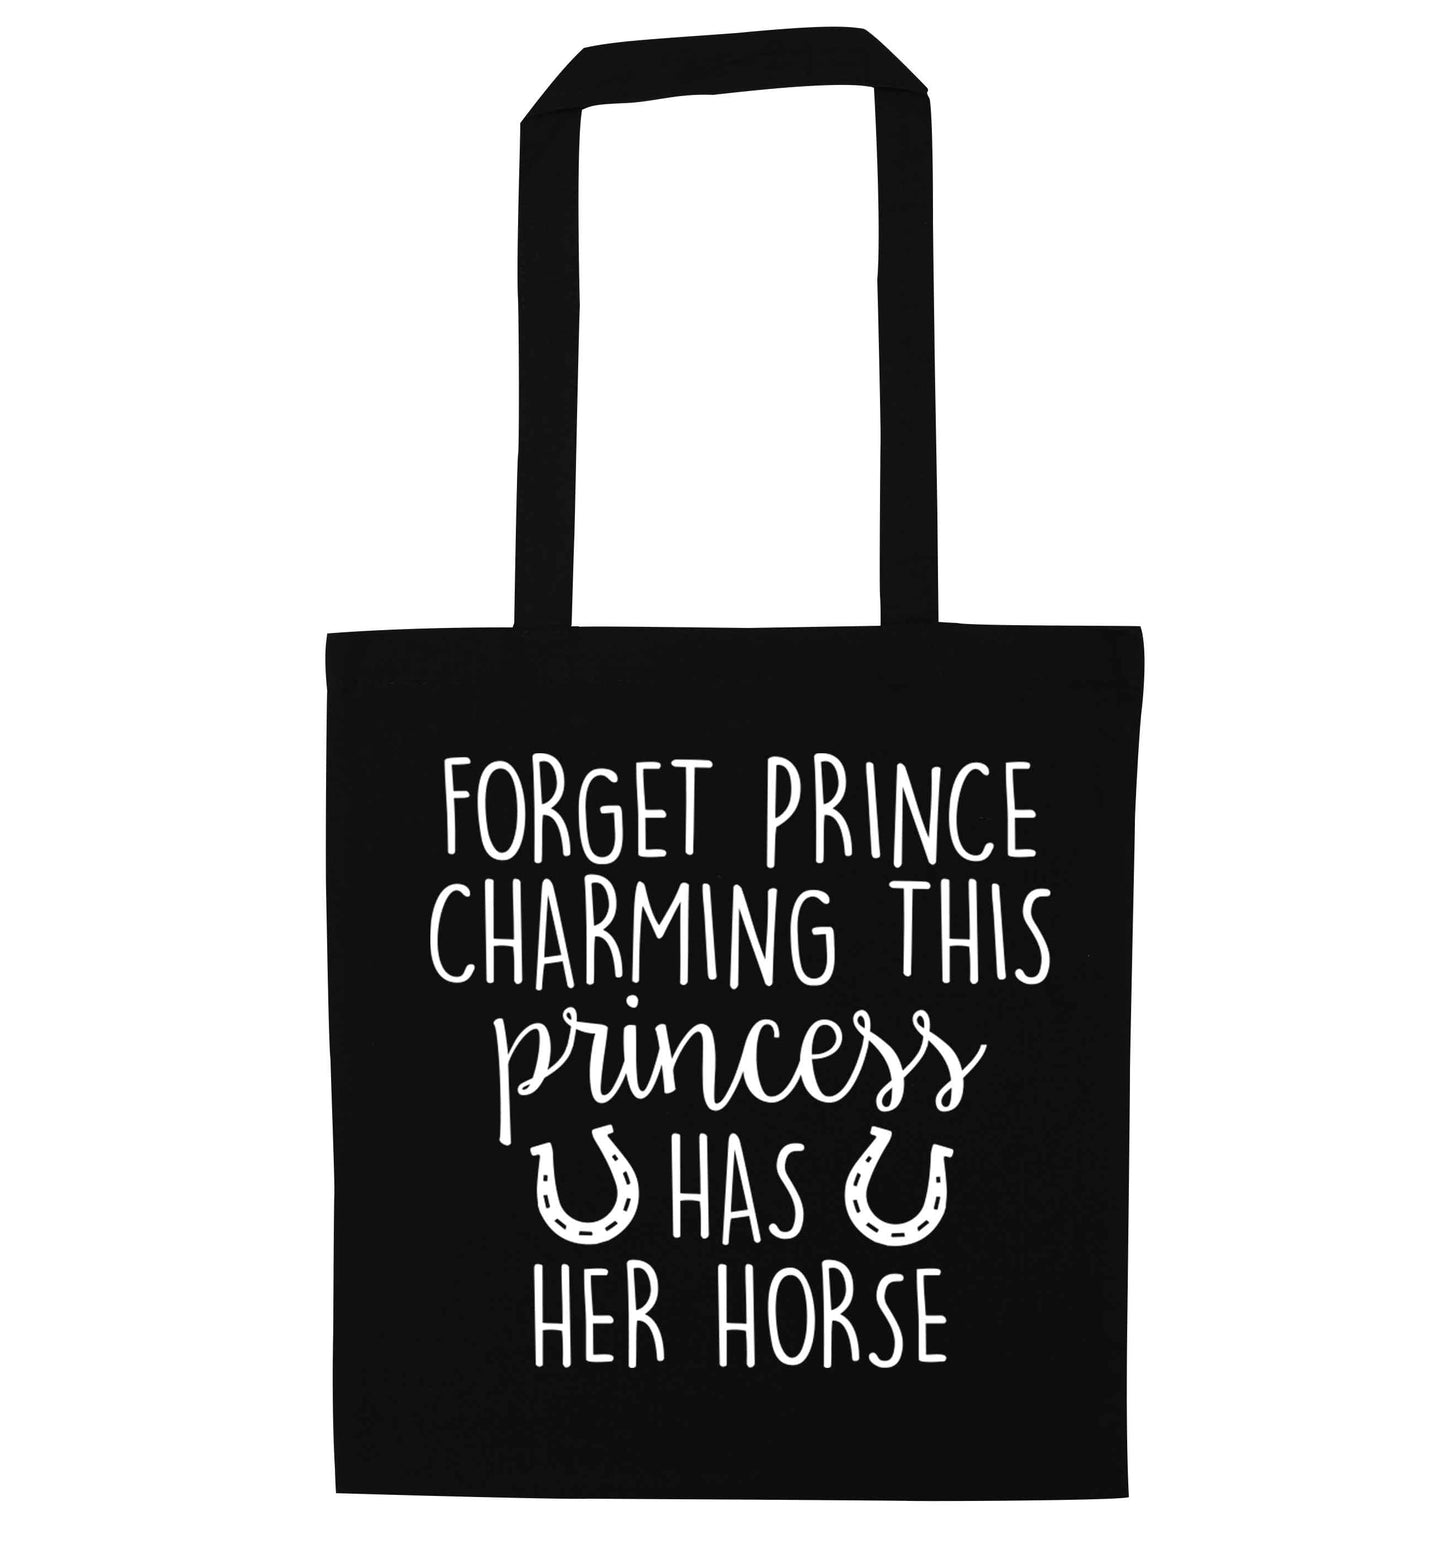 Forget prince charming this princess has her horse black tote bag